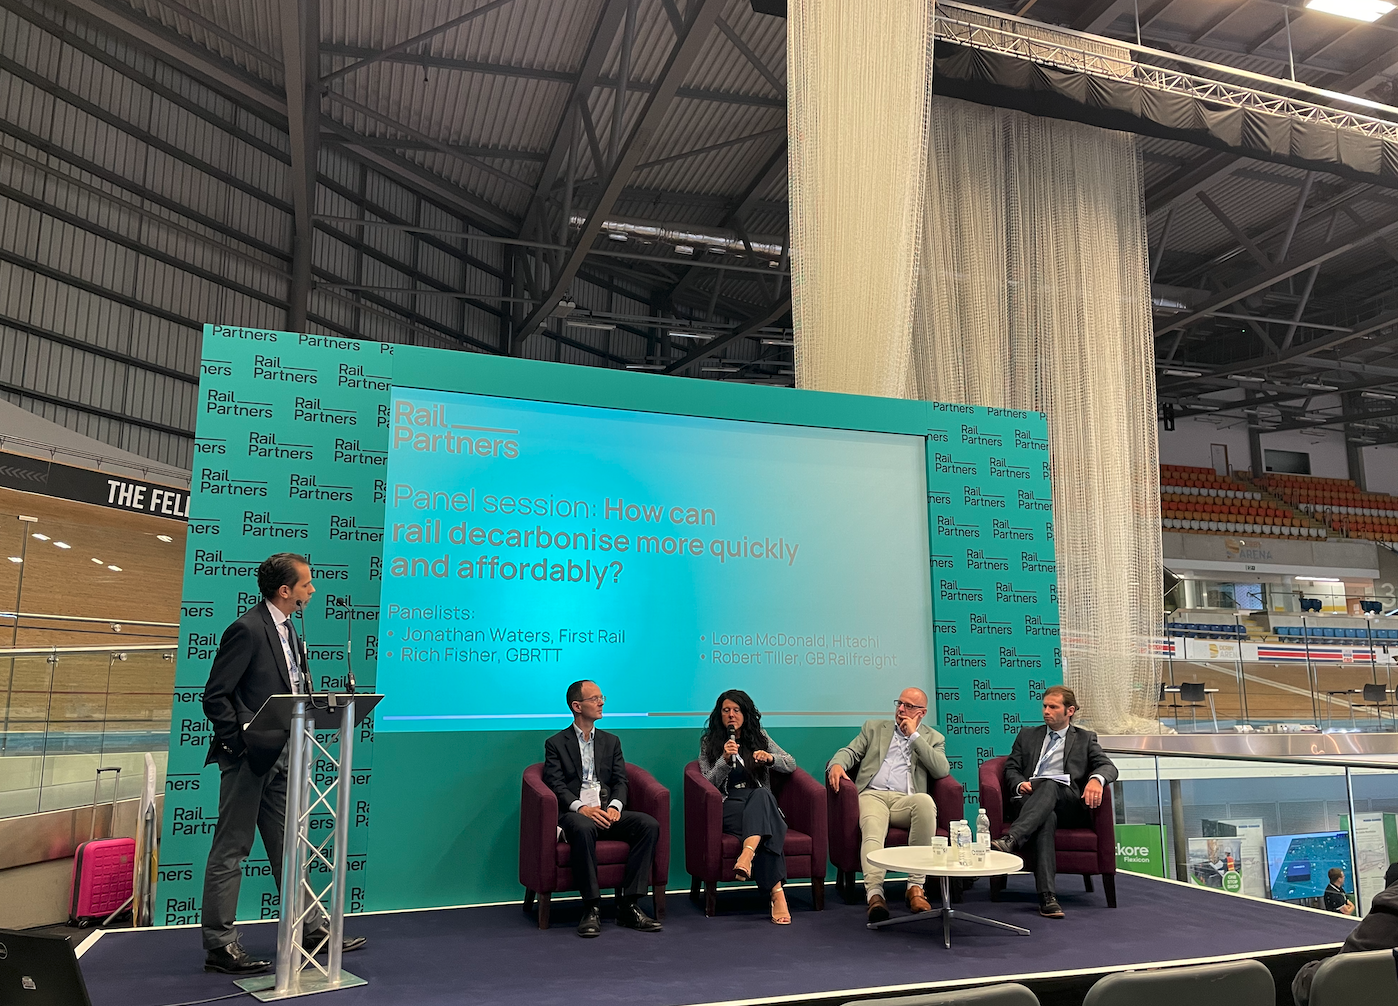 Rolling Stock Networking addressed how rail can decarbonise more quickly and affordably